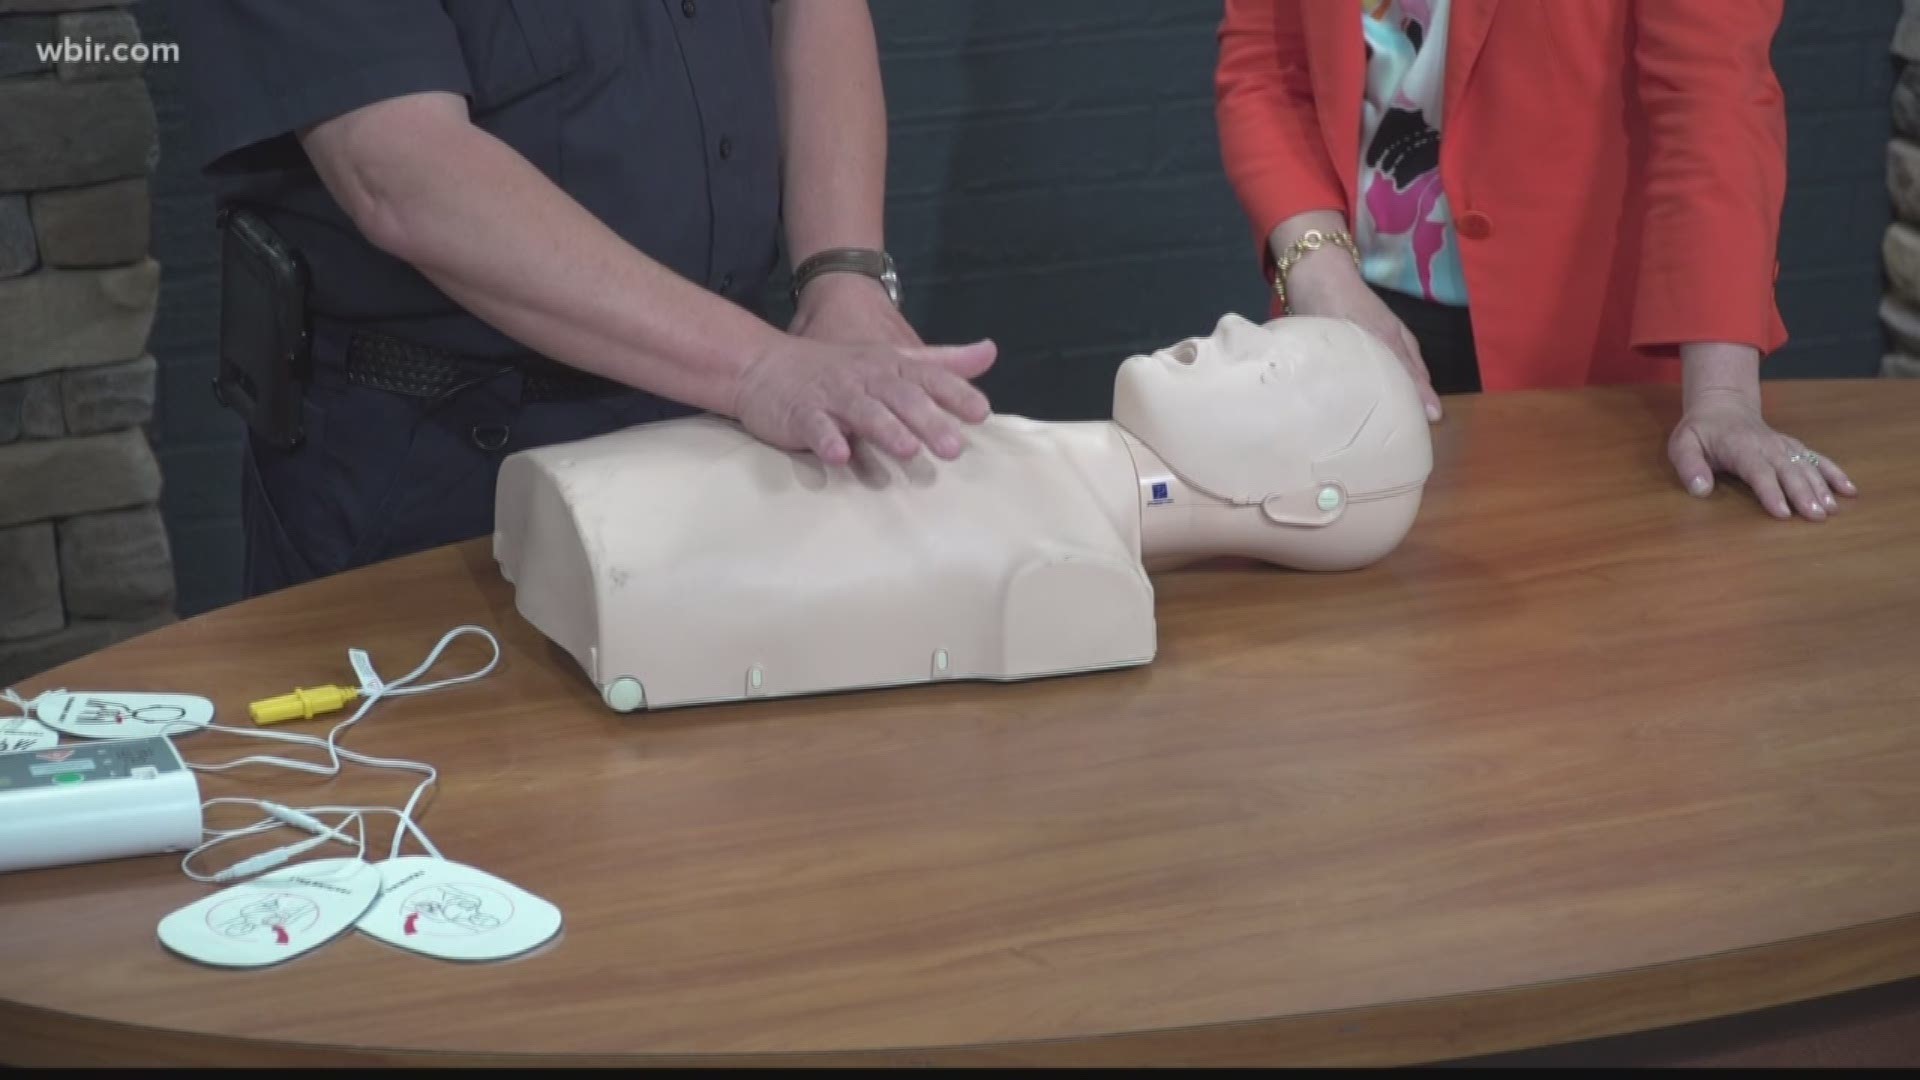 A first responder shows us the life-saving process of CPR, for both adults and children. The latest advice from experts is to use chest compressions, but not breaths.